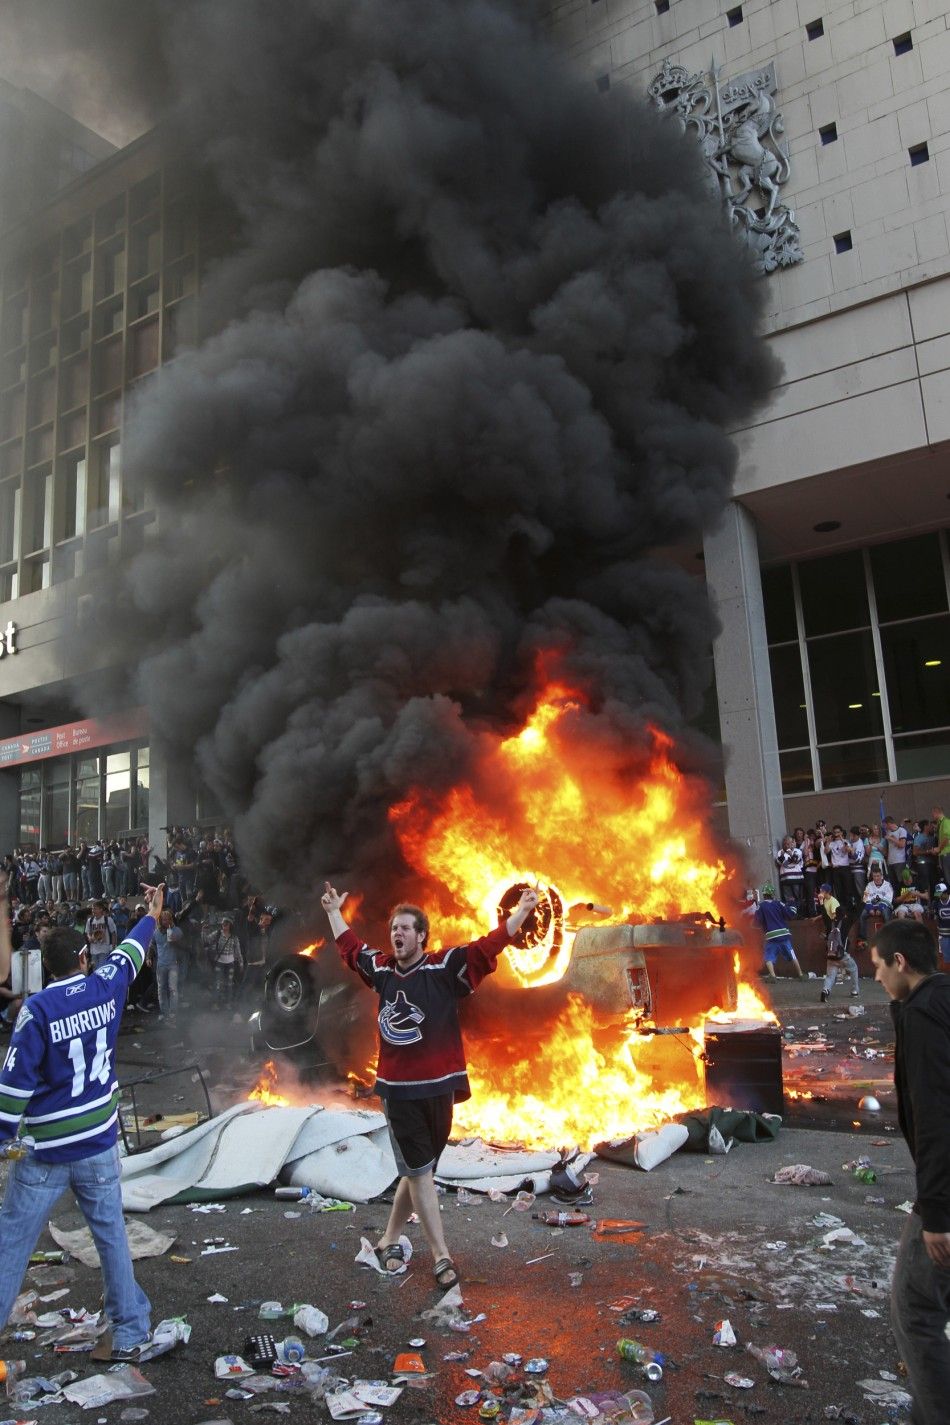 A Canucks fan gestures in front of an overturned burning pickup truck during riots in downtown Vancouver, British Columbia